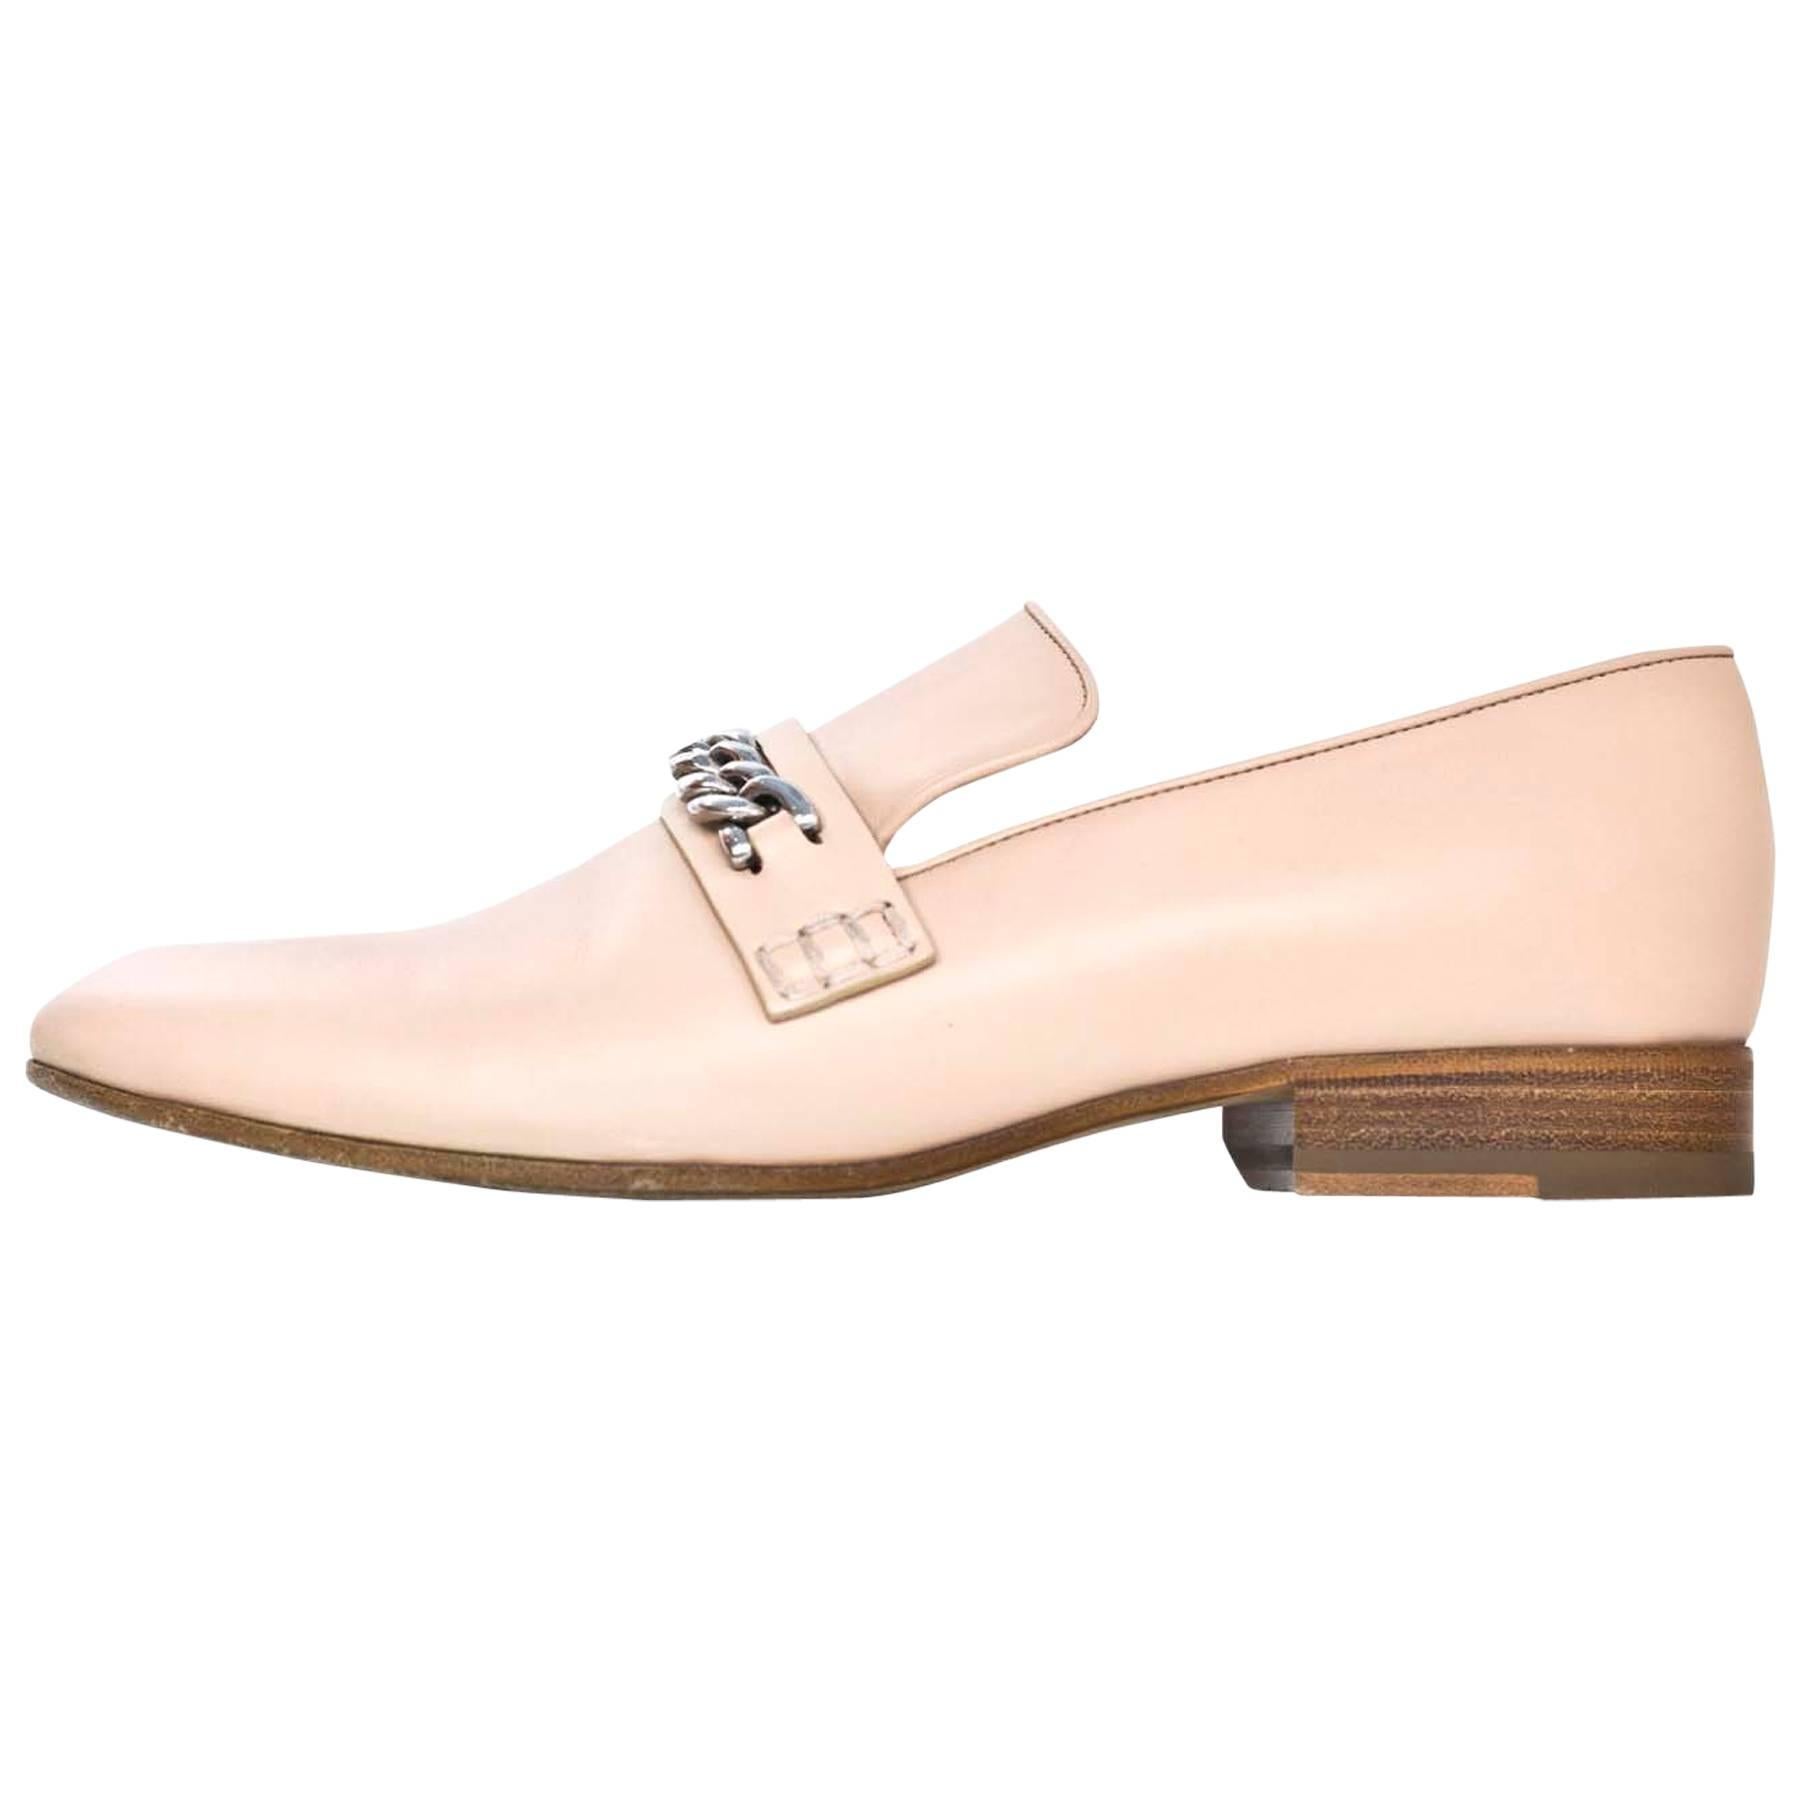 Celine Phoebe Philo Collection Nude Loafers Sz 39.5 with Box